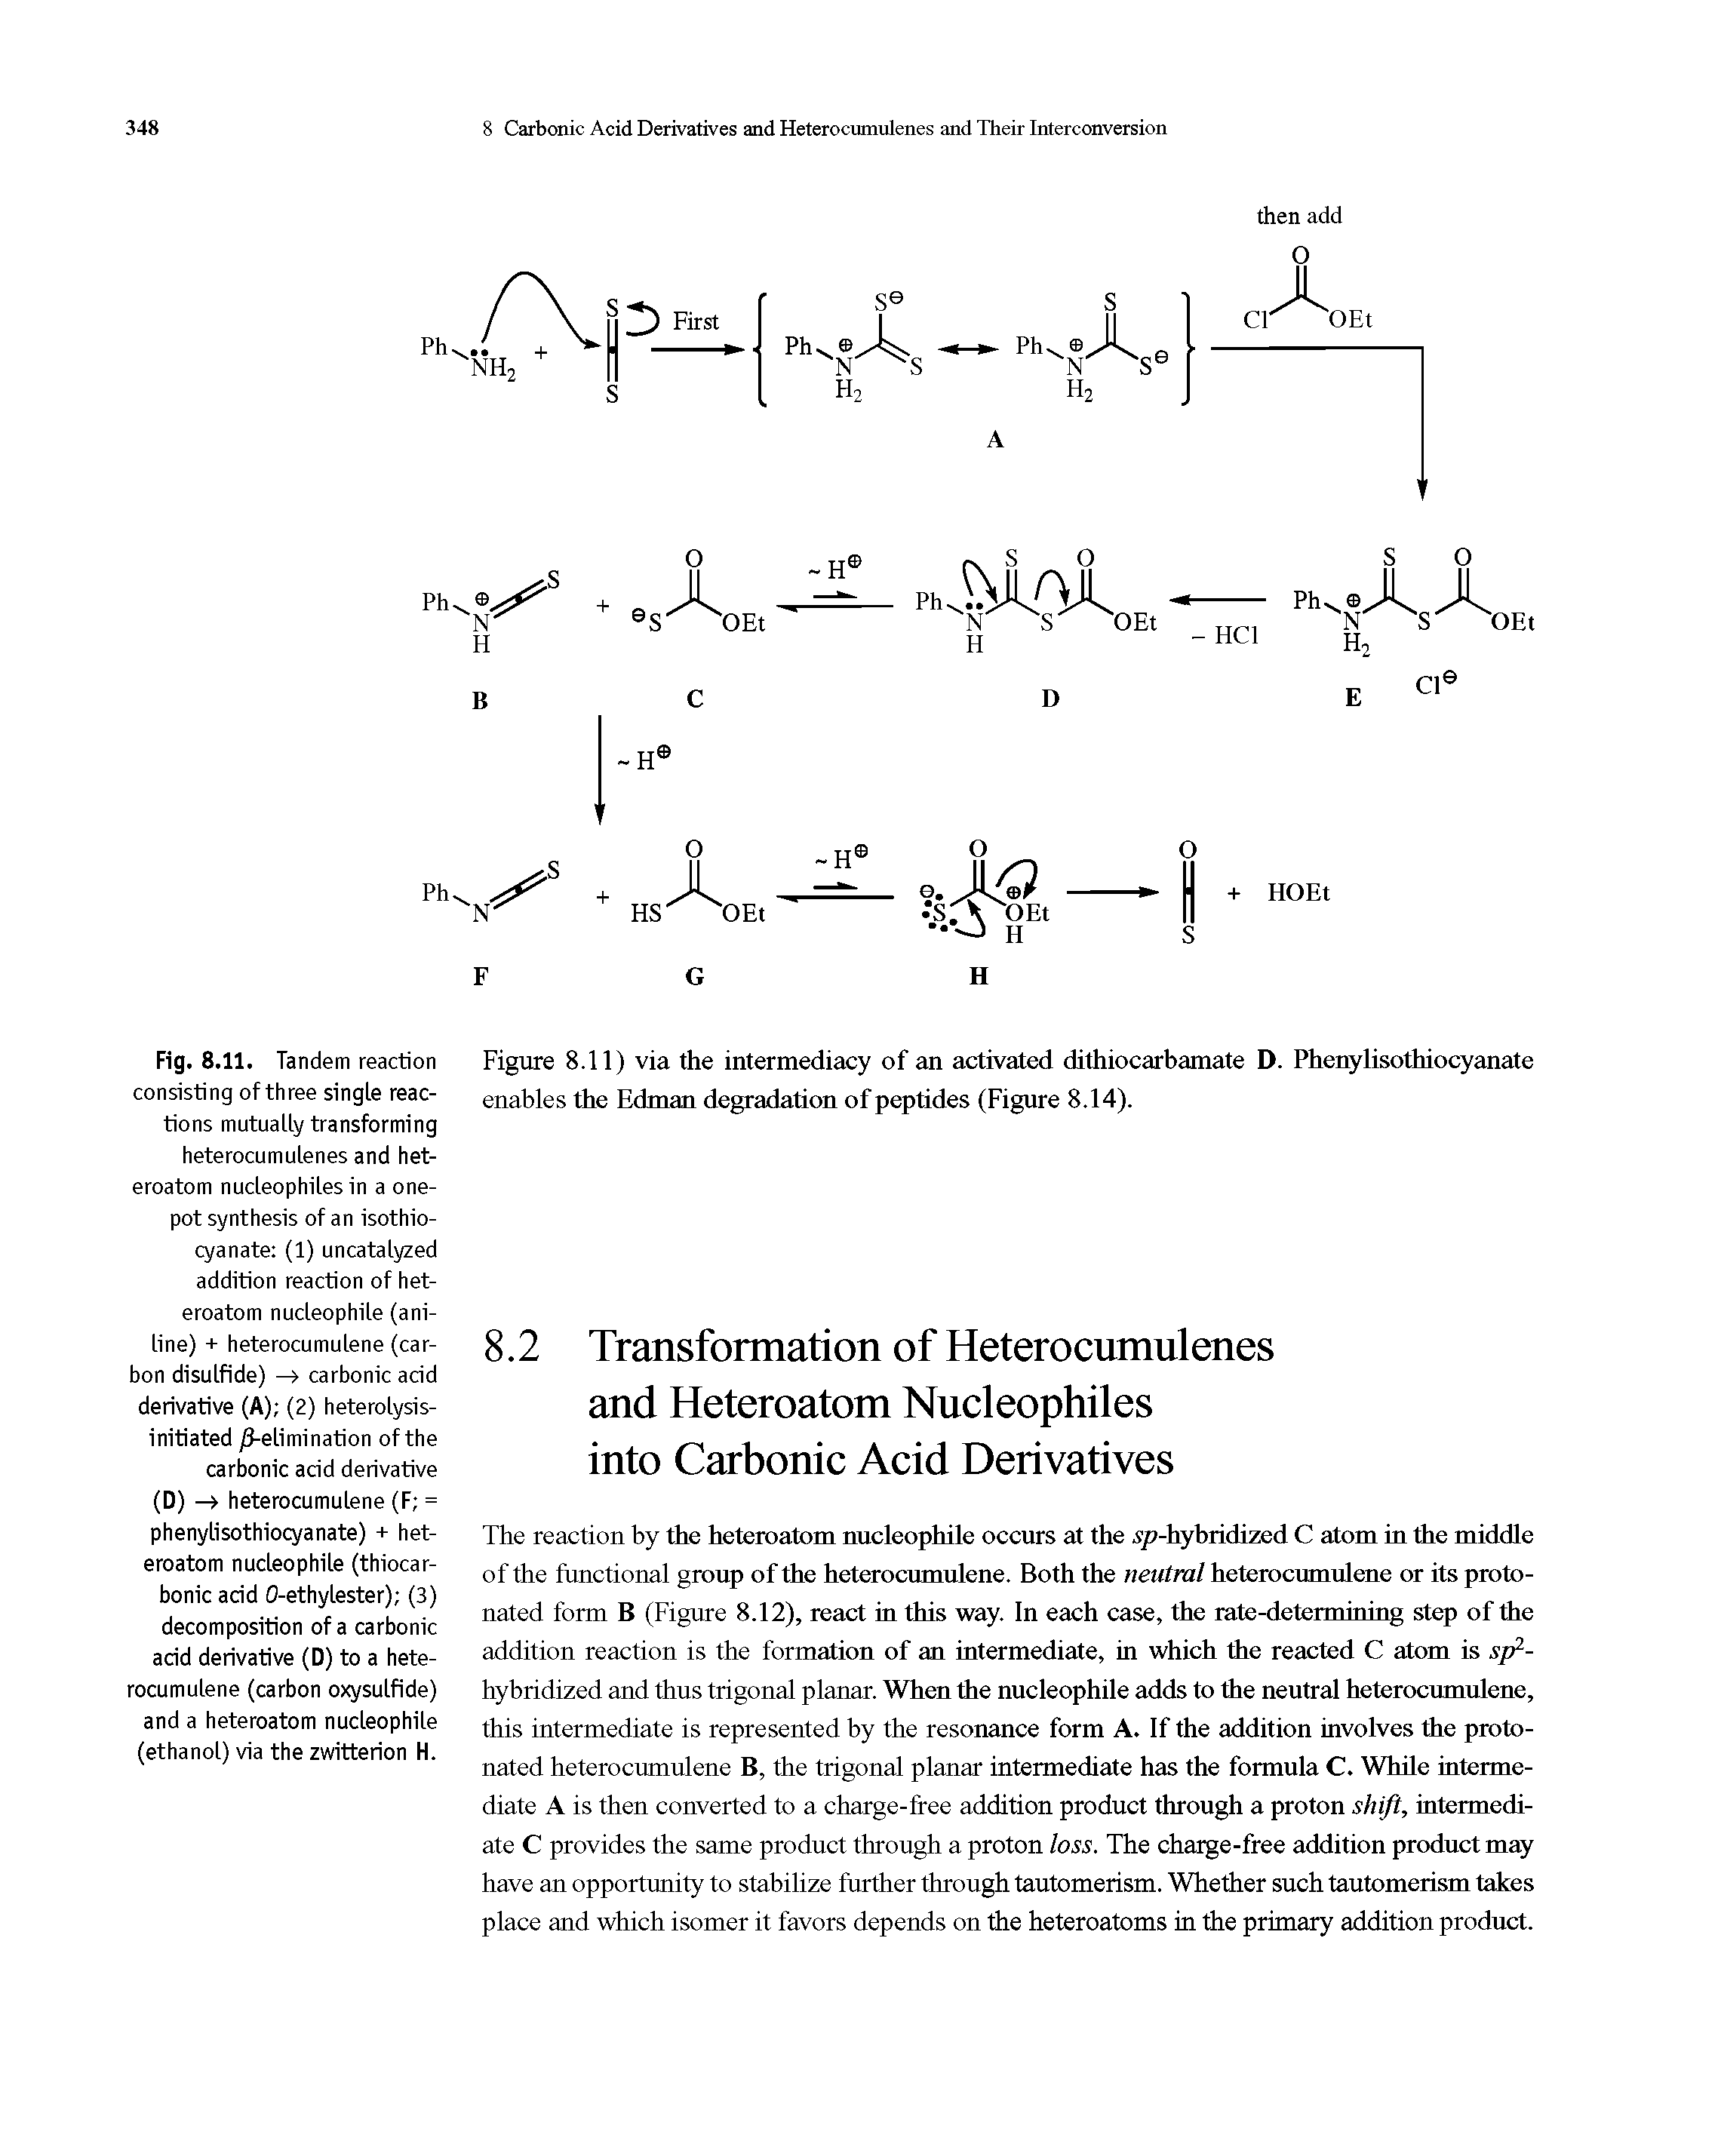 Fig. 8.11. Tandem reaction consisting of three single reactions mutually transforming heterocumulenes and heteroatom nucleophiles in a one-pot synthesis of an isothiocyanate (1) uncatalyzed addition reaction of heteroatom nucleophile (aniline) + heterocumulene (carbon disulfide) —> carbonic acid derivative (A) (2) heterolysis-initiated /3-elimination of the carbonic acid derivative (D) -> heterocumulene (F = phenylisothiocyanate) + heteroatom nucleophile (thiocar-bonic acid O-ethylester) (3) decomposition of a carbonic acid derivative (D) to a heterocumulene (carbon oxysulfide) and a heteroatom nucleophile (ethanol) via the zwitterion H.